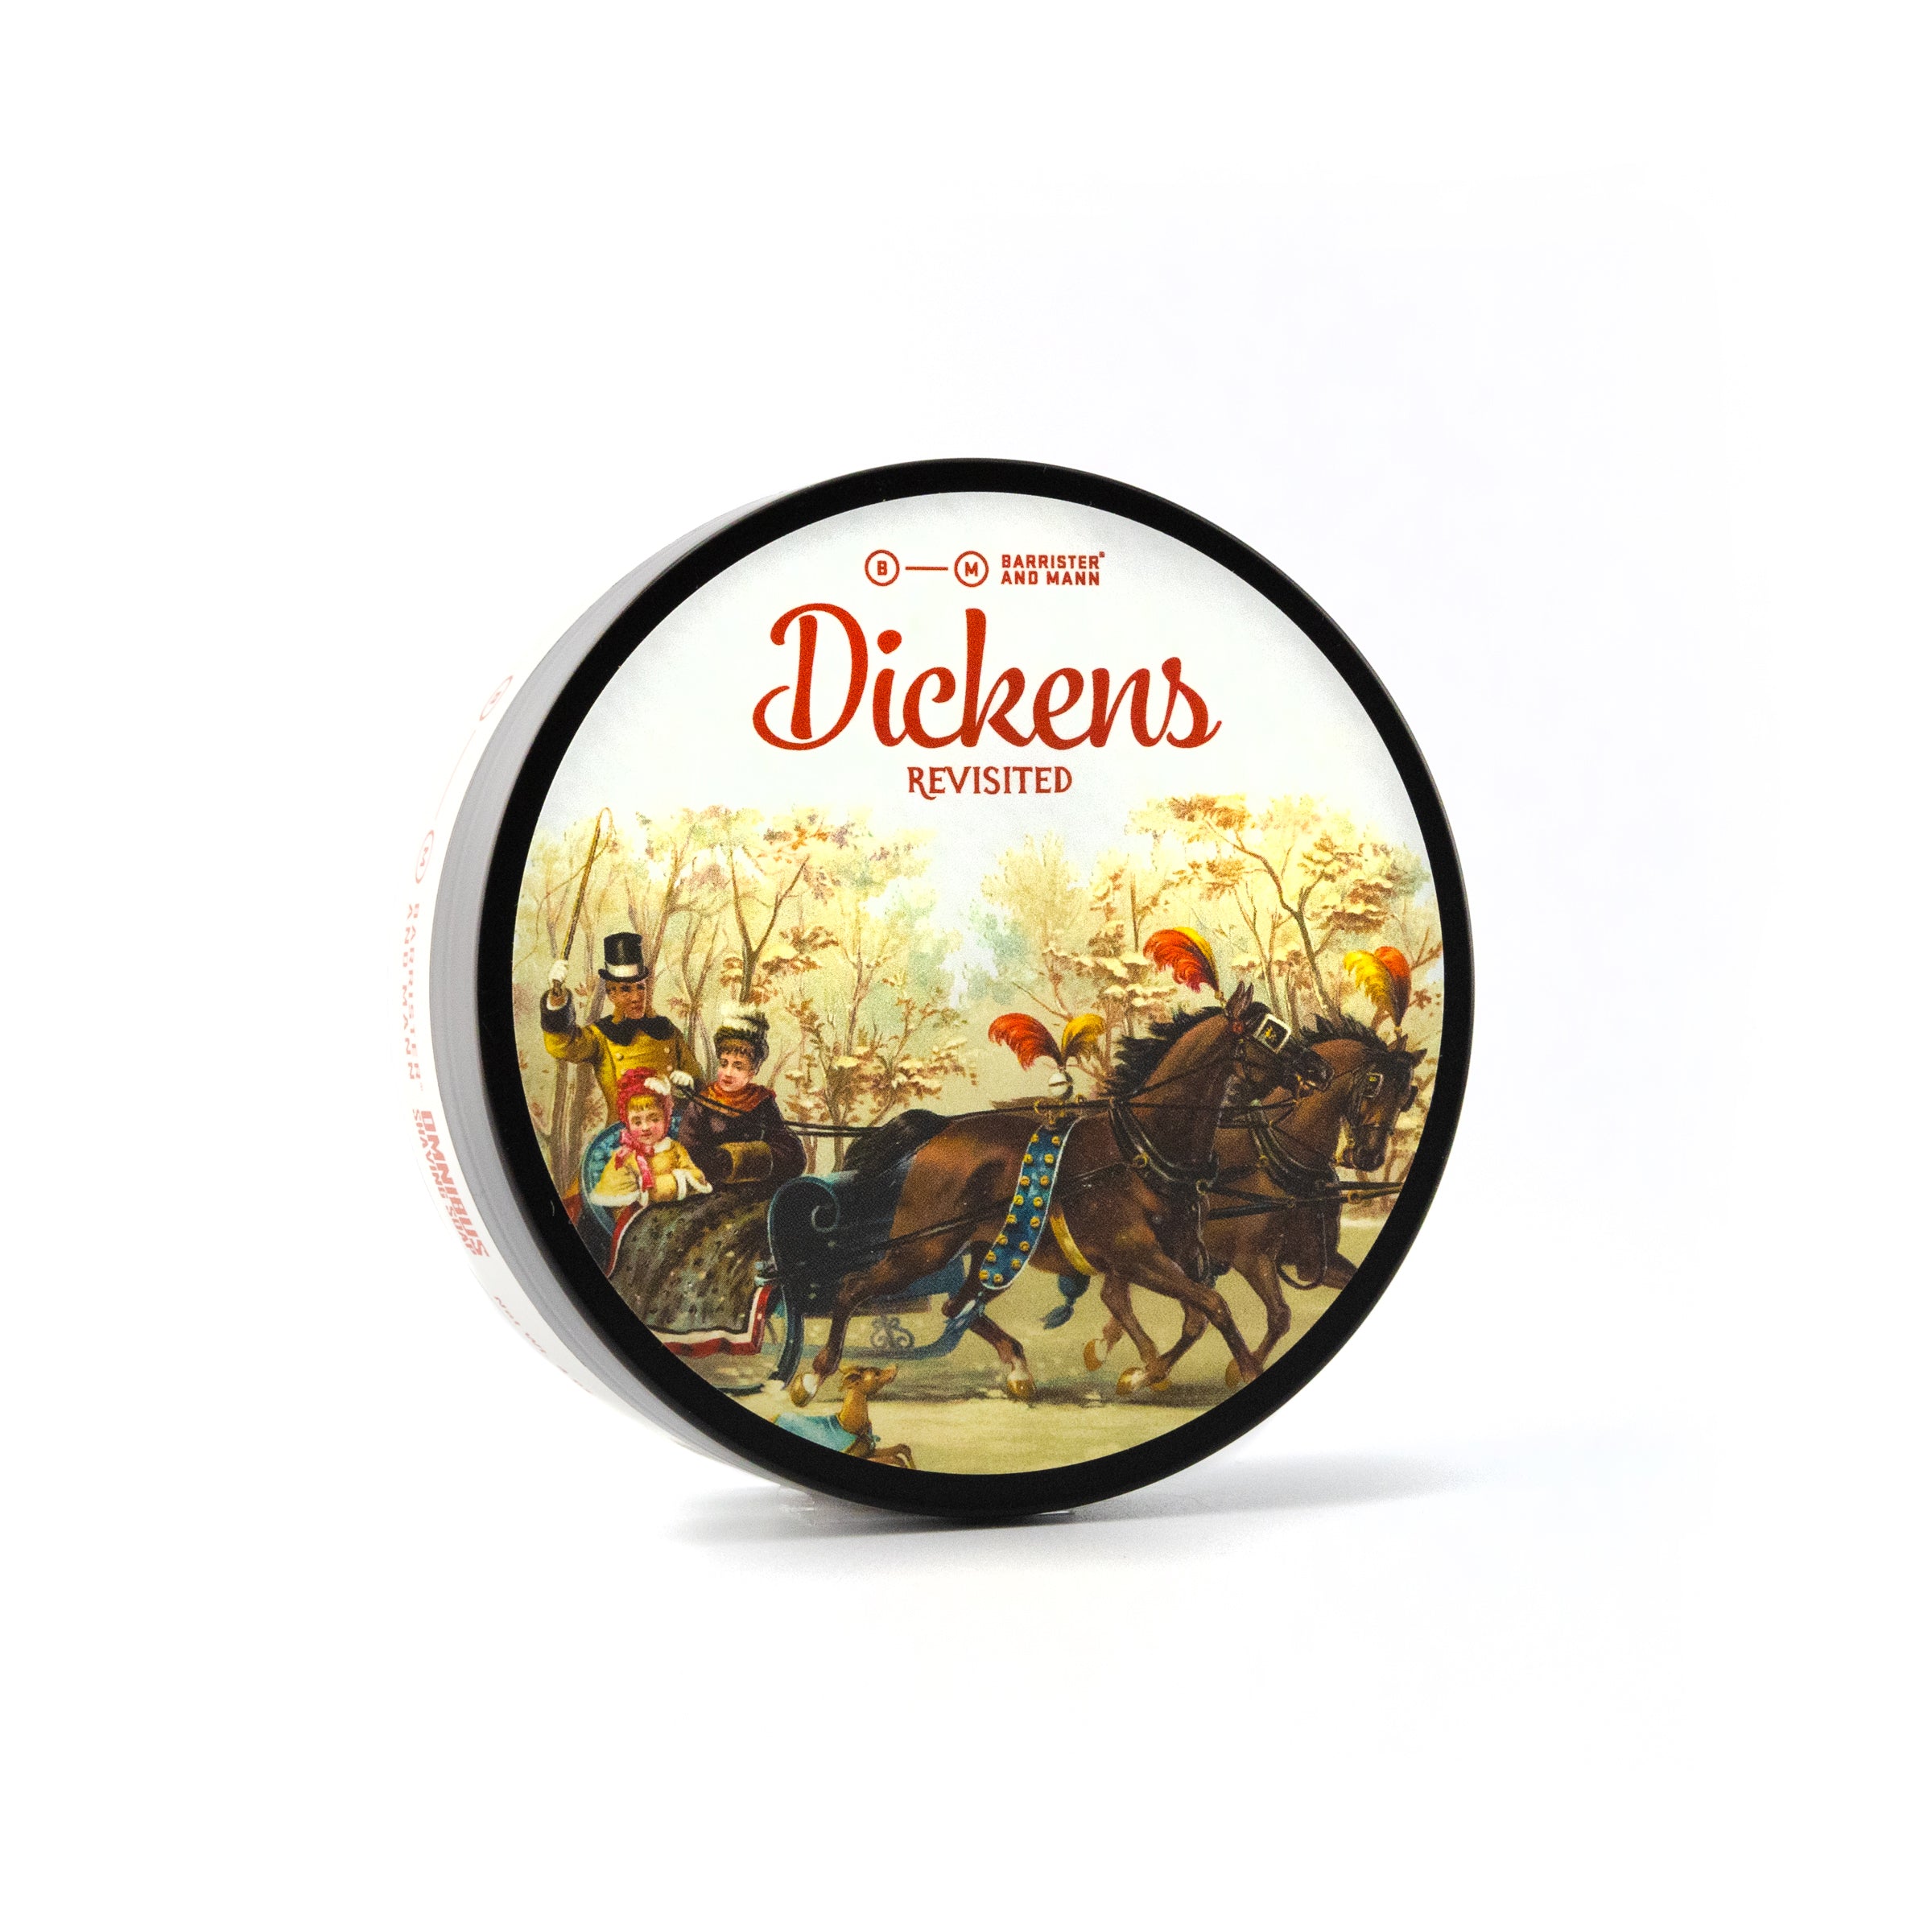 Dickens, Revisited Shaving Soap - Barrister and Mann LLC